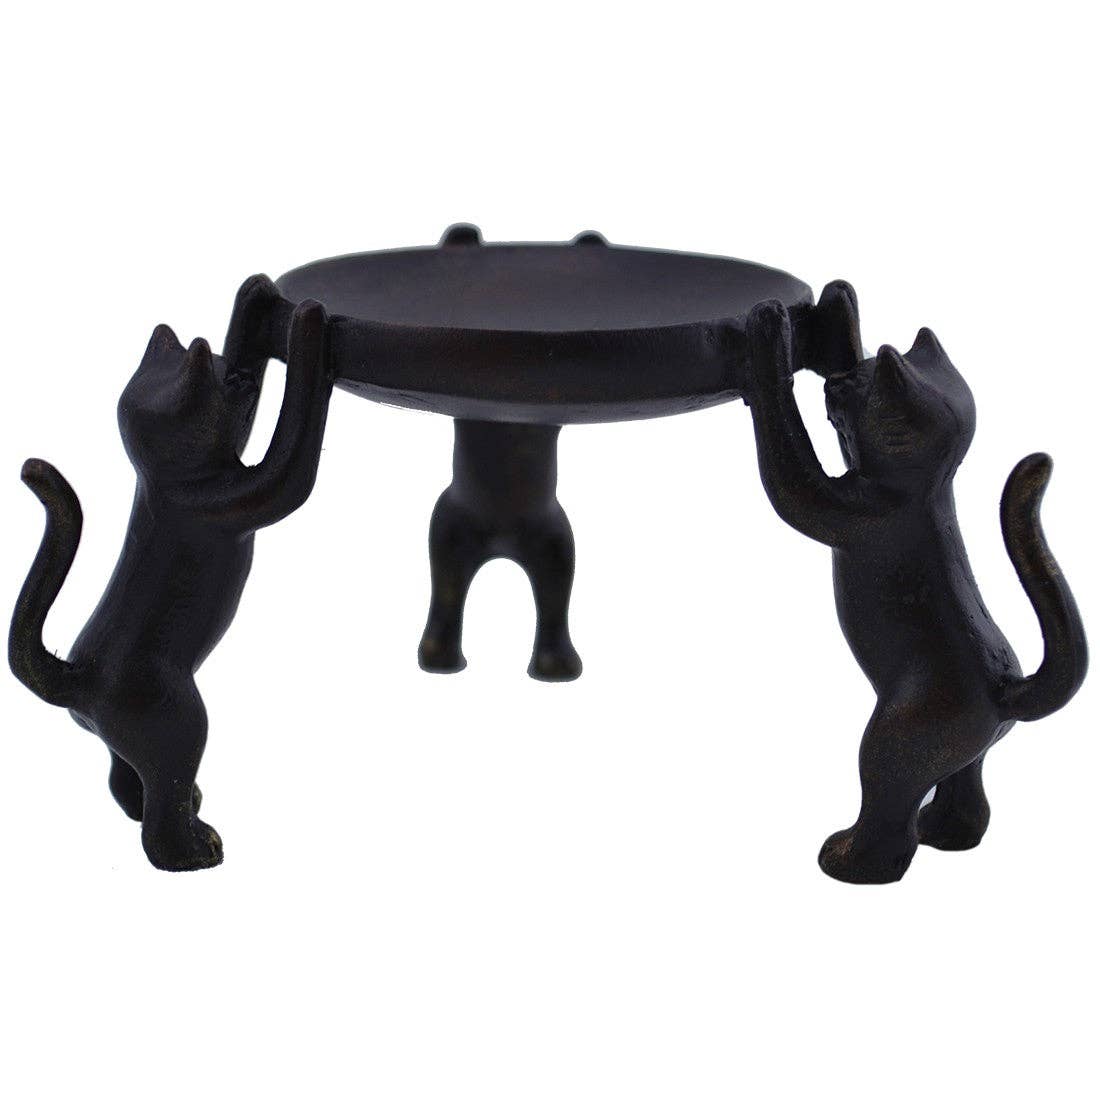 3 Cat Candle Holder - Spiral Circle